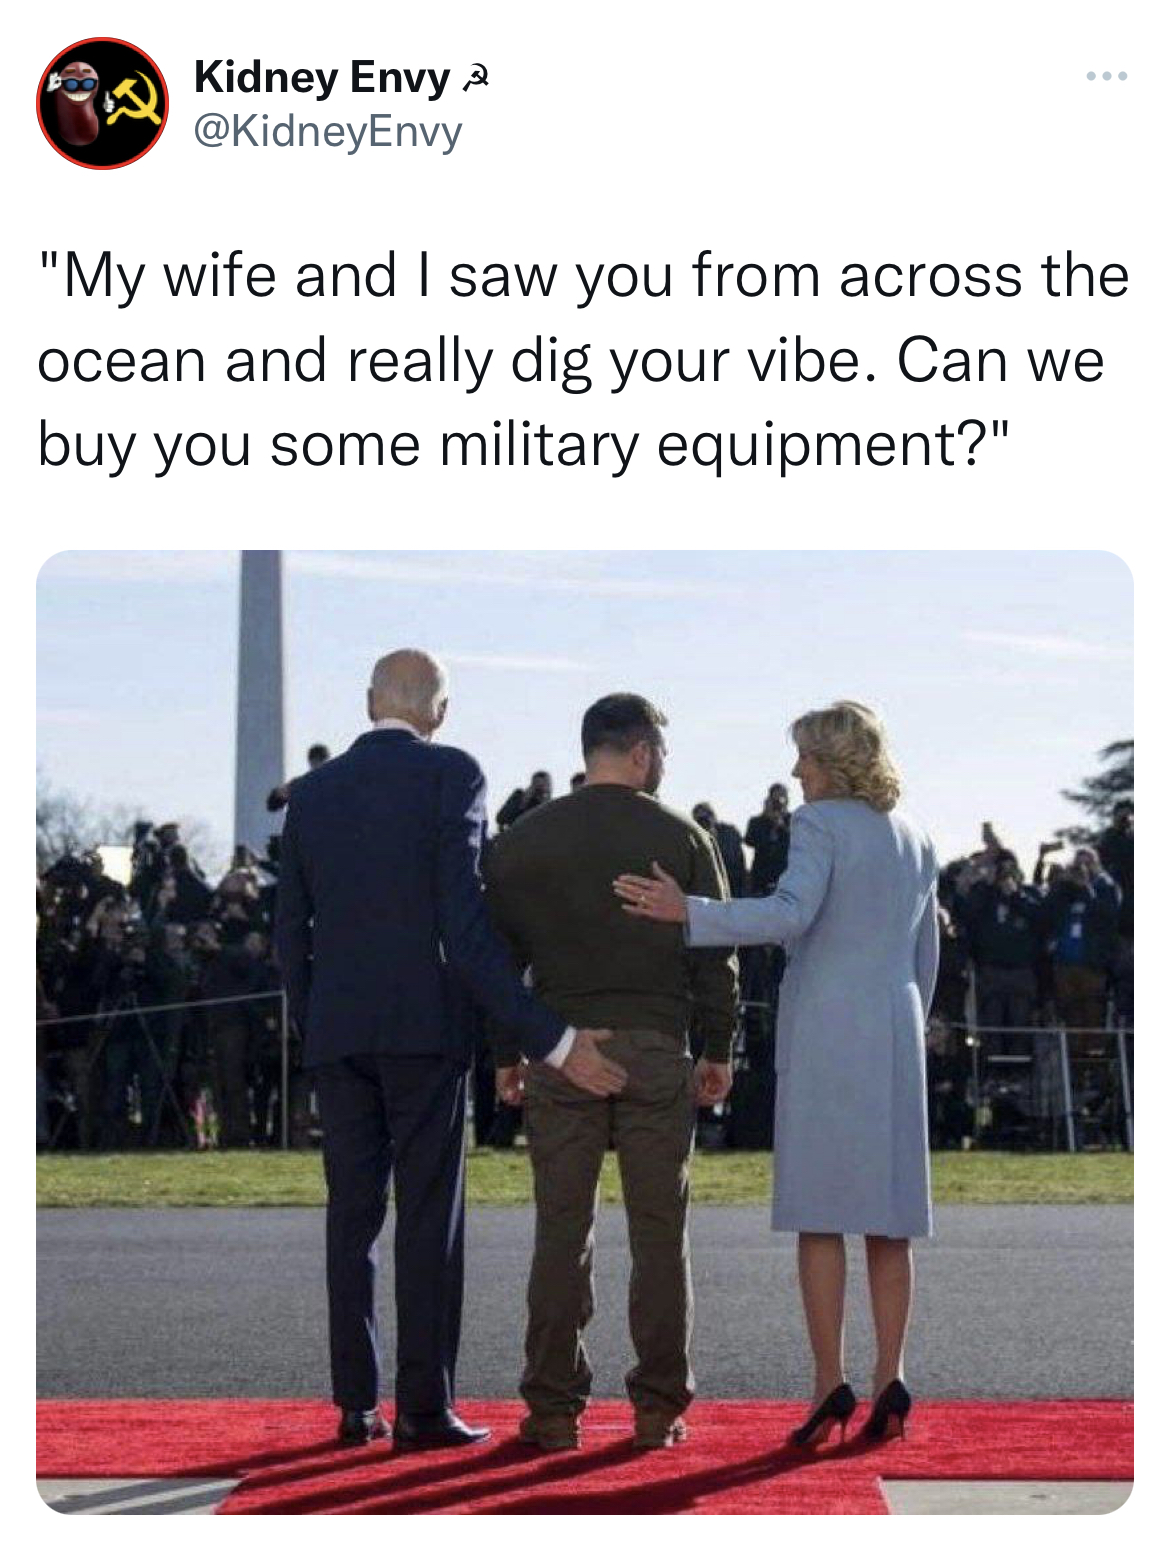 swinger memes across the bar - national mall - Kidney Envy "My wife and I aw you from across the ocean and really dig your vibe. Can we buy you some military equipment?"